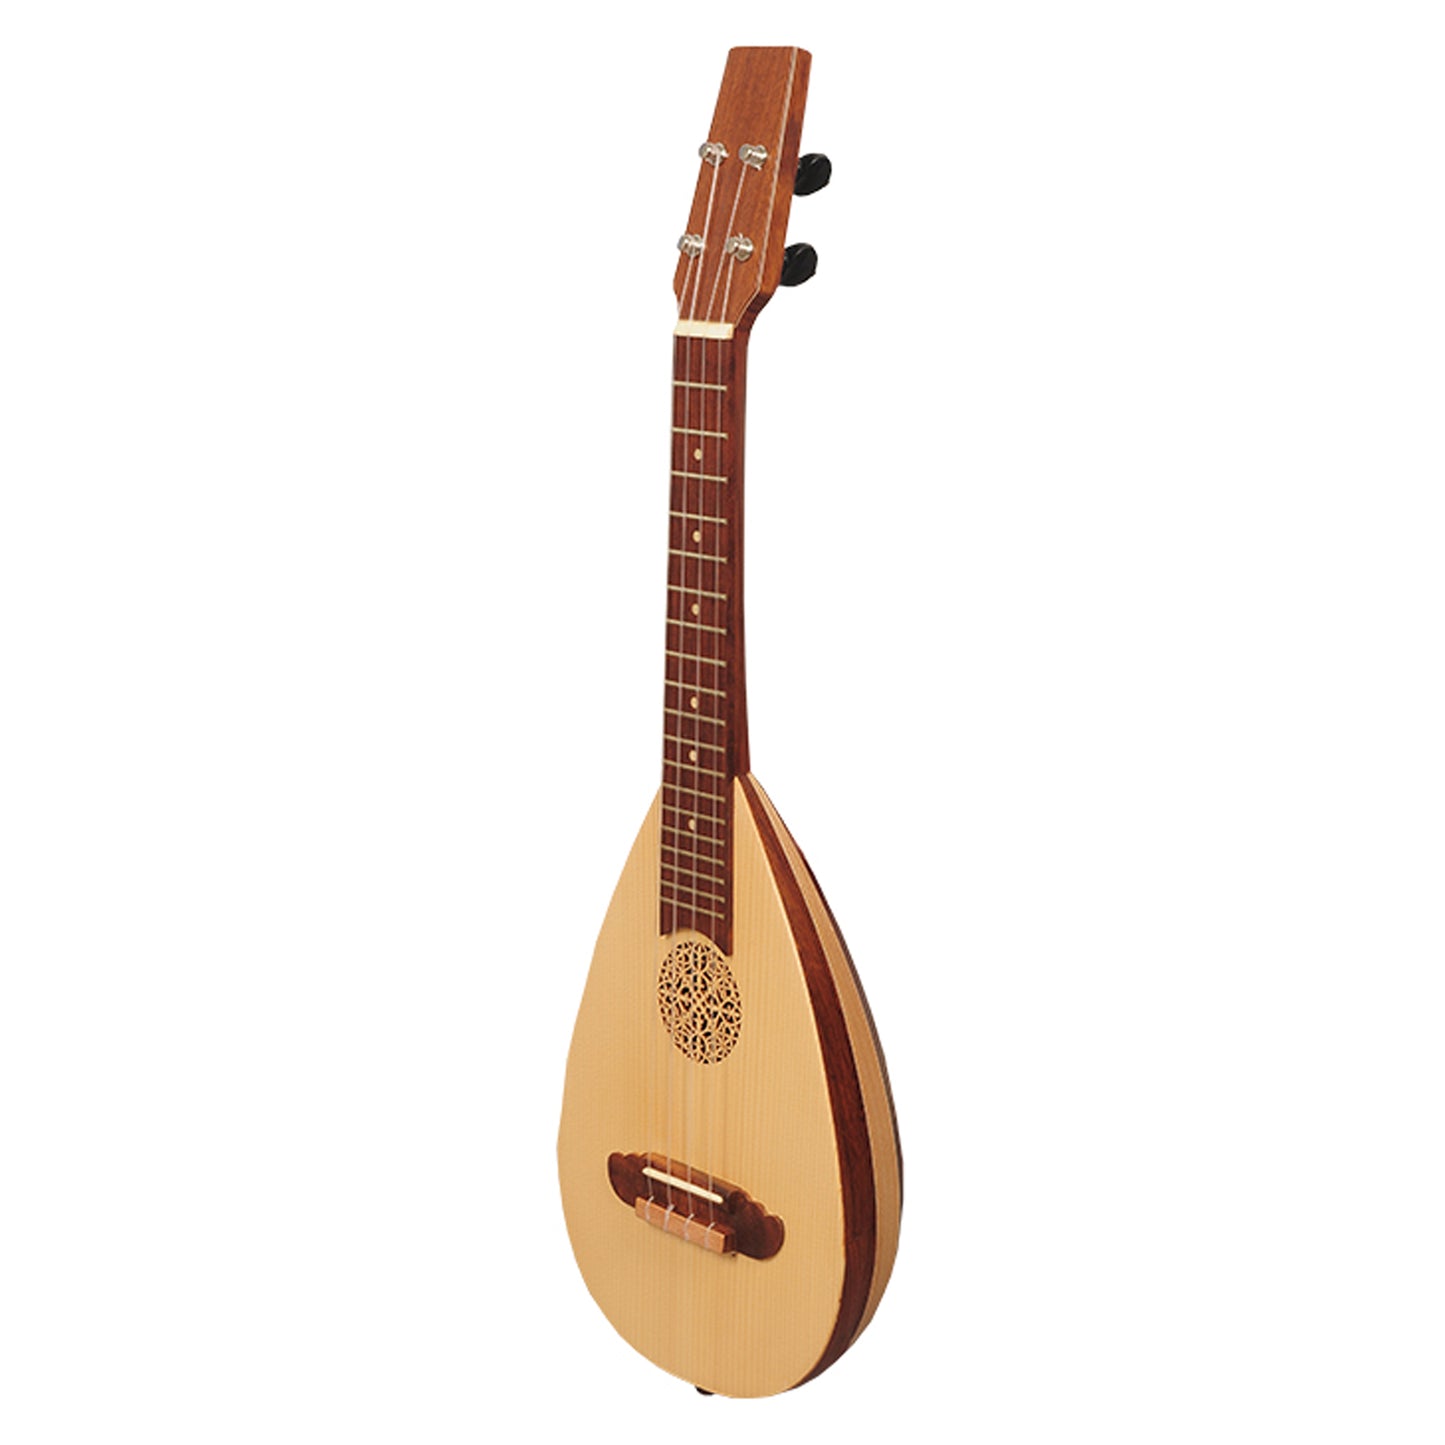 Heartland Baroque Ukulele, 4 String Concert Variegated Rosewood and Lacewood